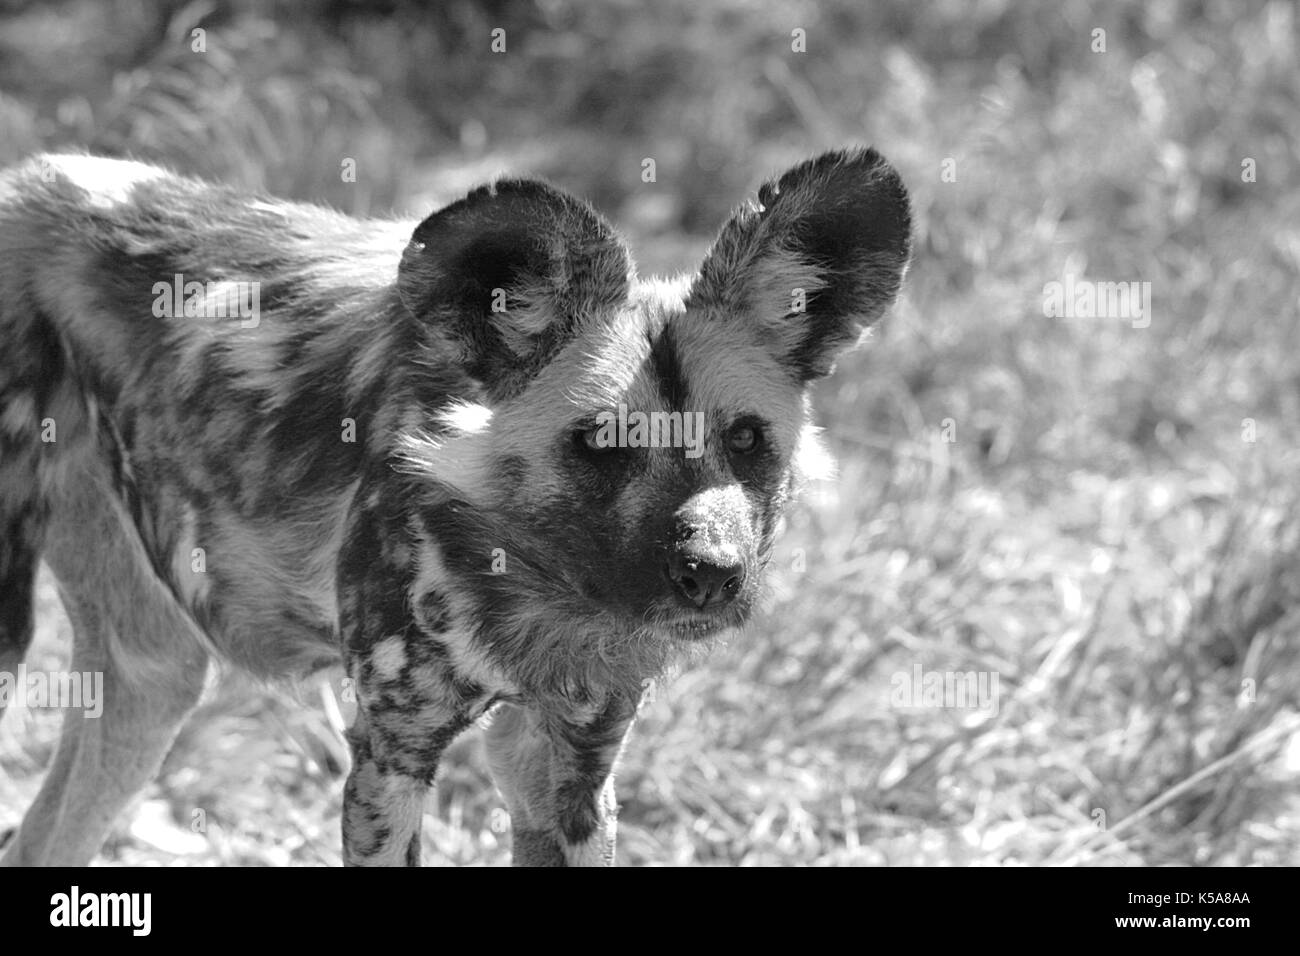 Monochrome African Wild Dog portrait in Limpopo Province, South Africa Stock Photo